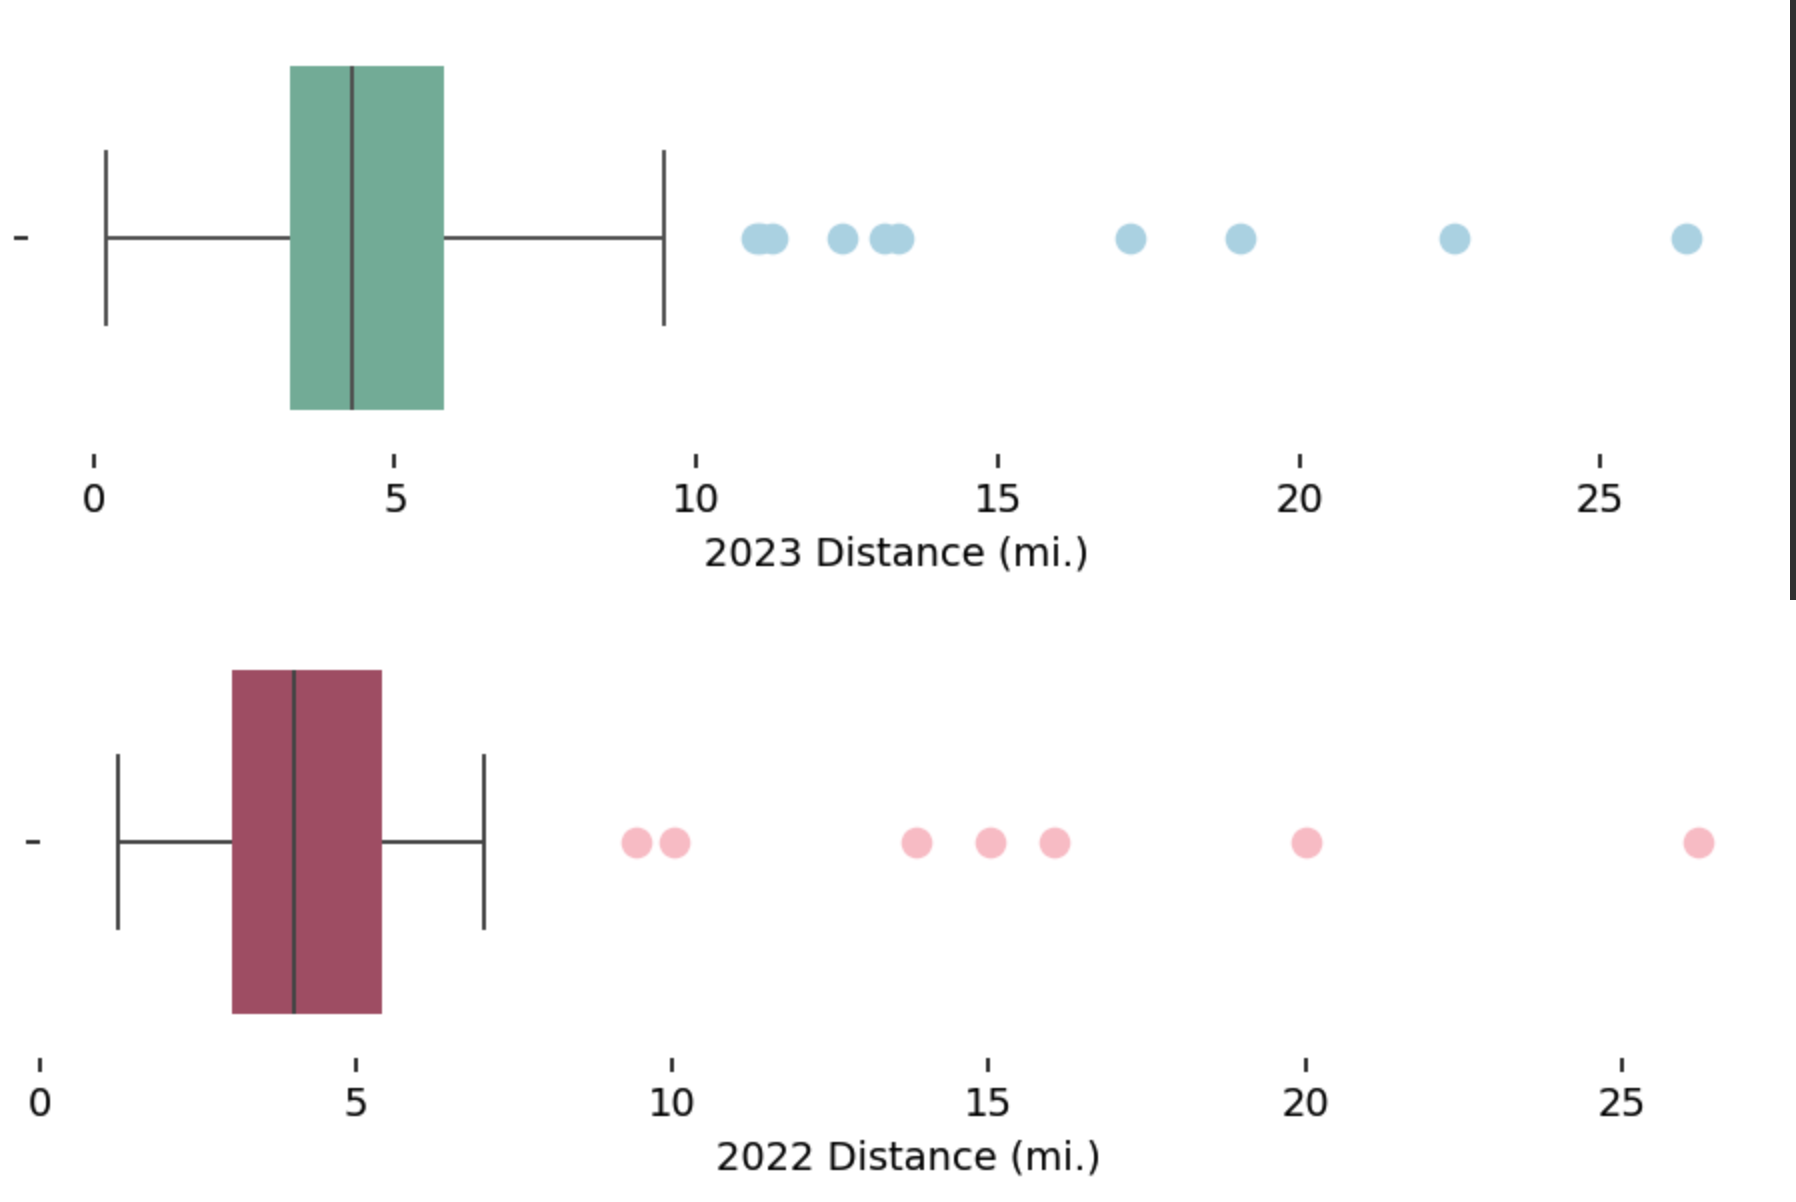 A box-and-whisker plot of the distance of my runs